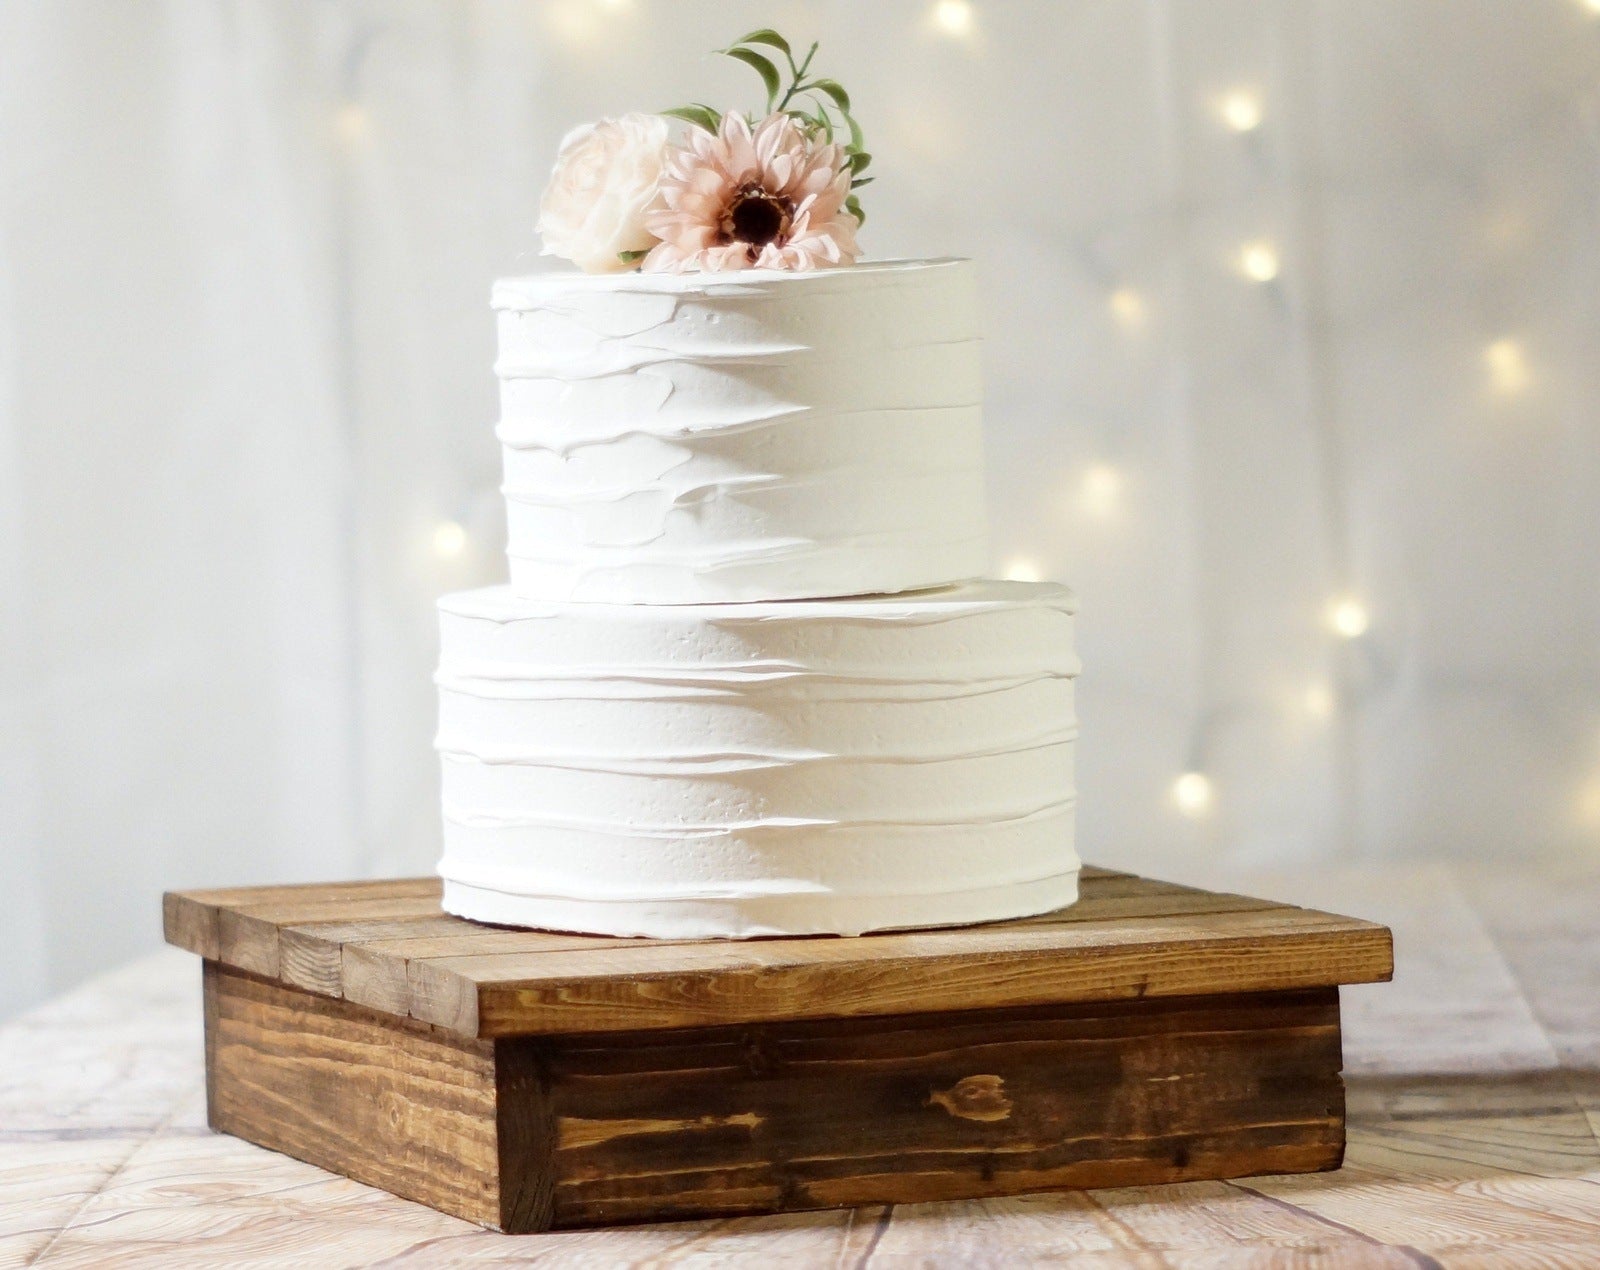 Silver Plated Wedding Cake Stand - 18